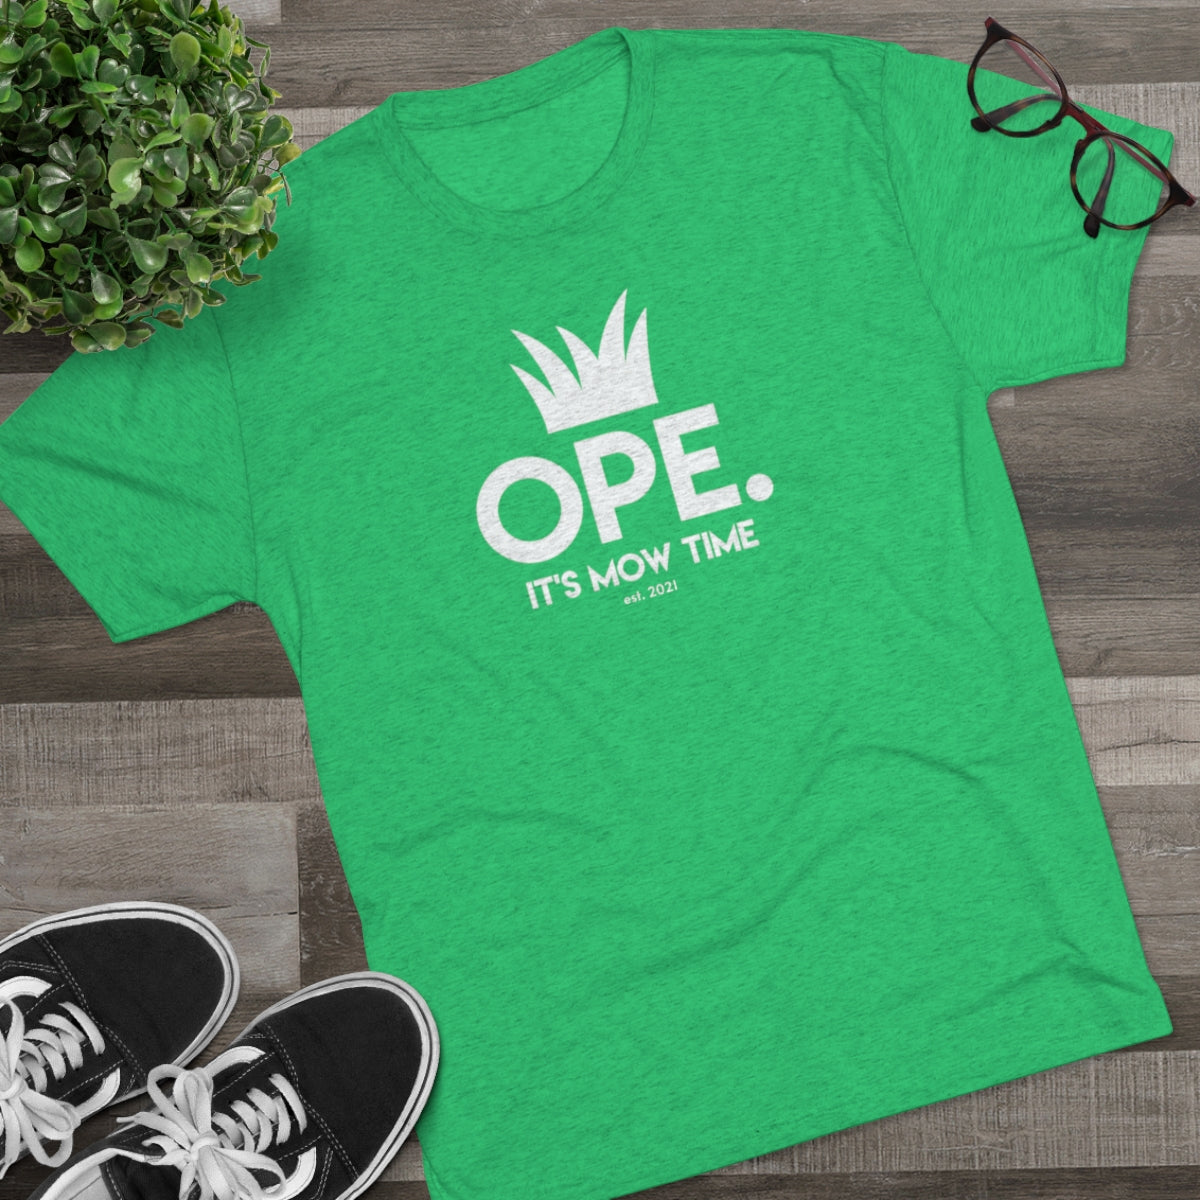 Ope It's Mow Time Tee